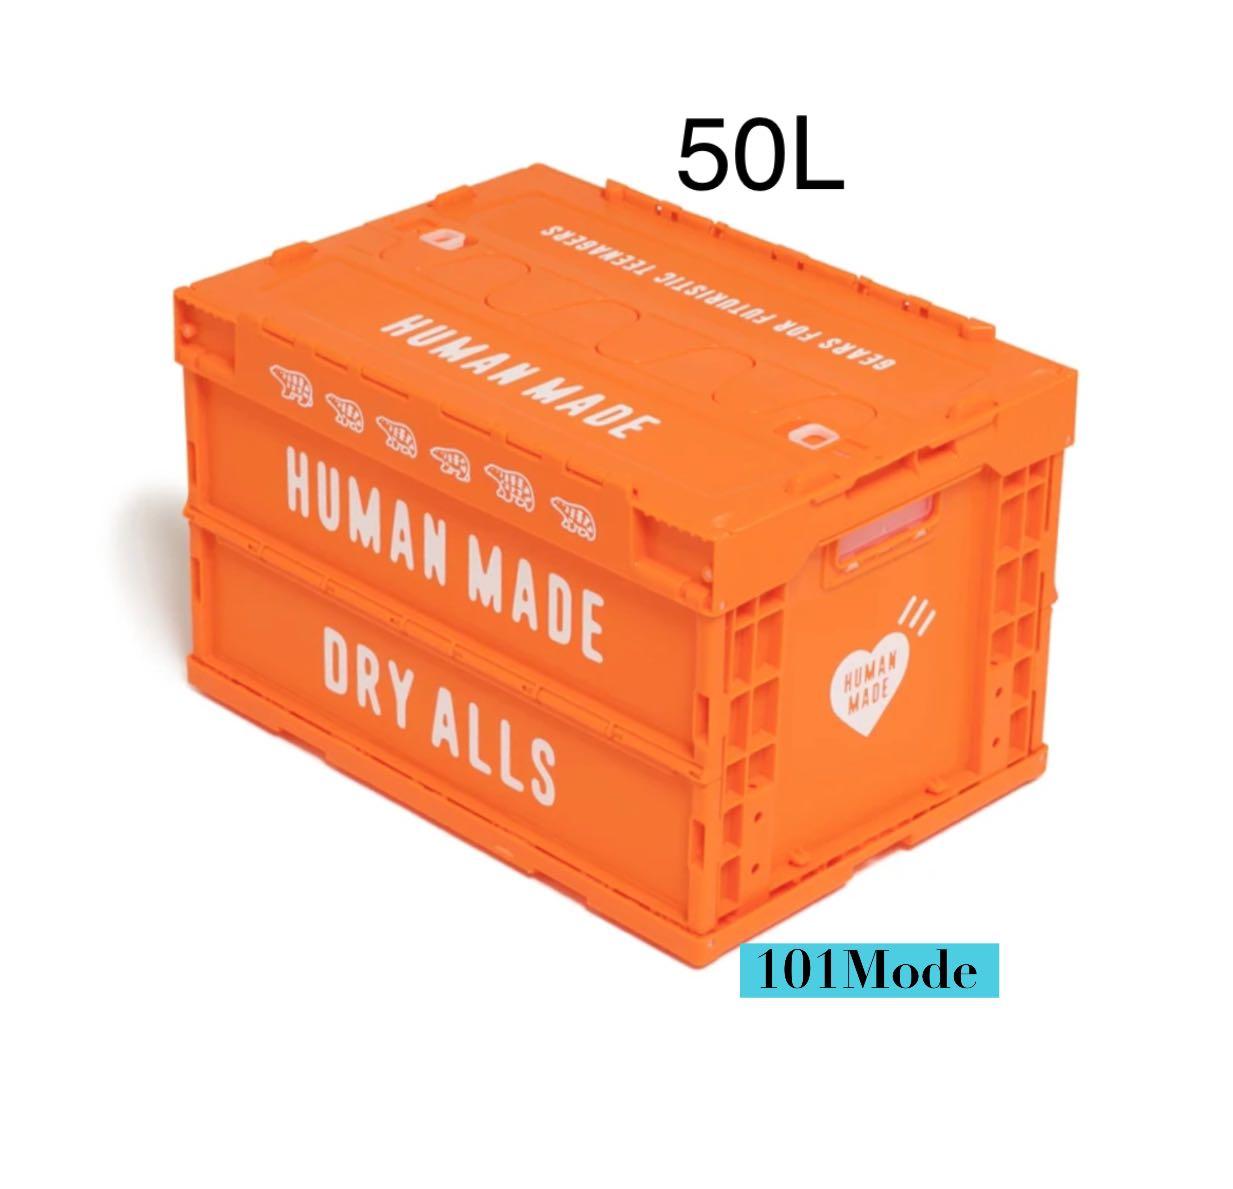 HUMAN MADE Container 50L Orange, Men's Fashion, Watches 